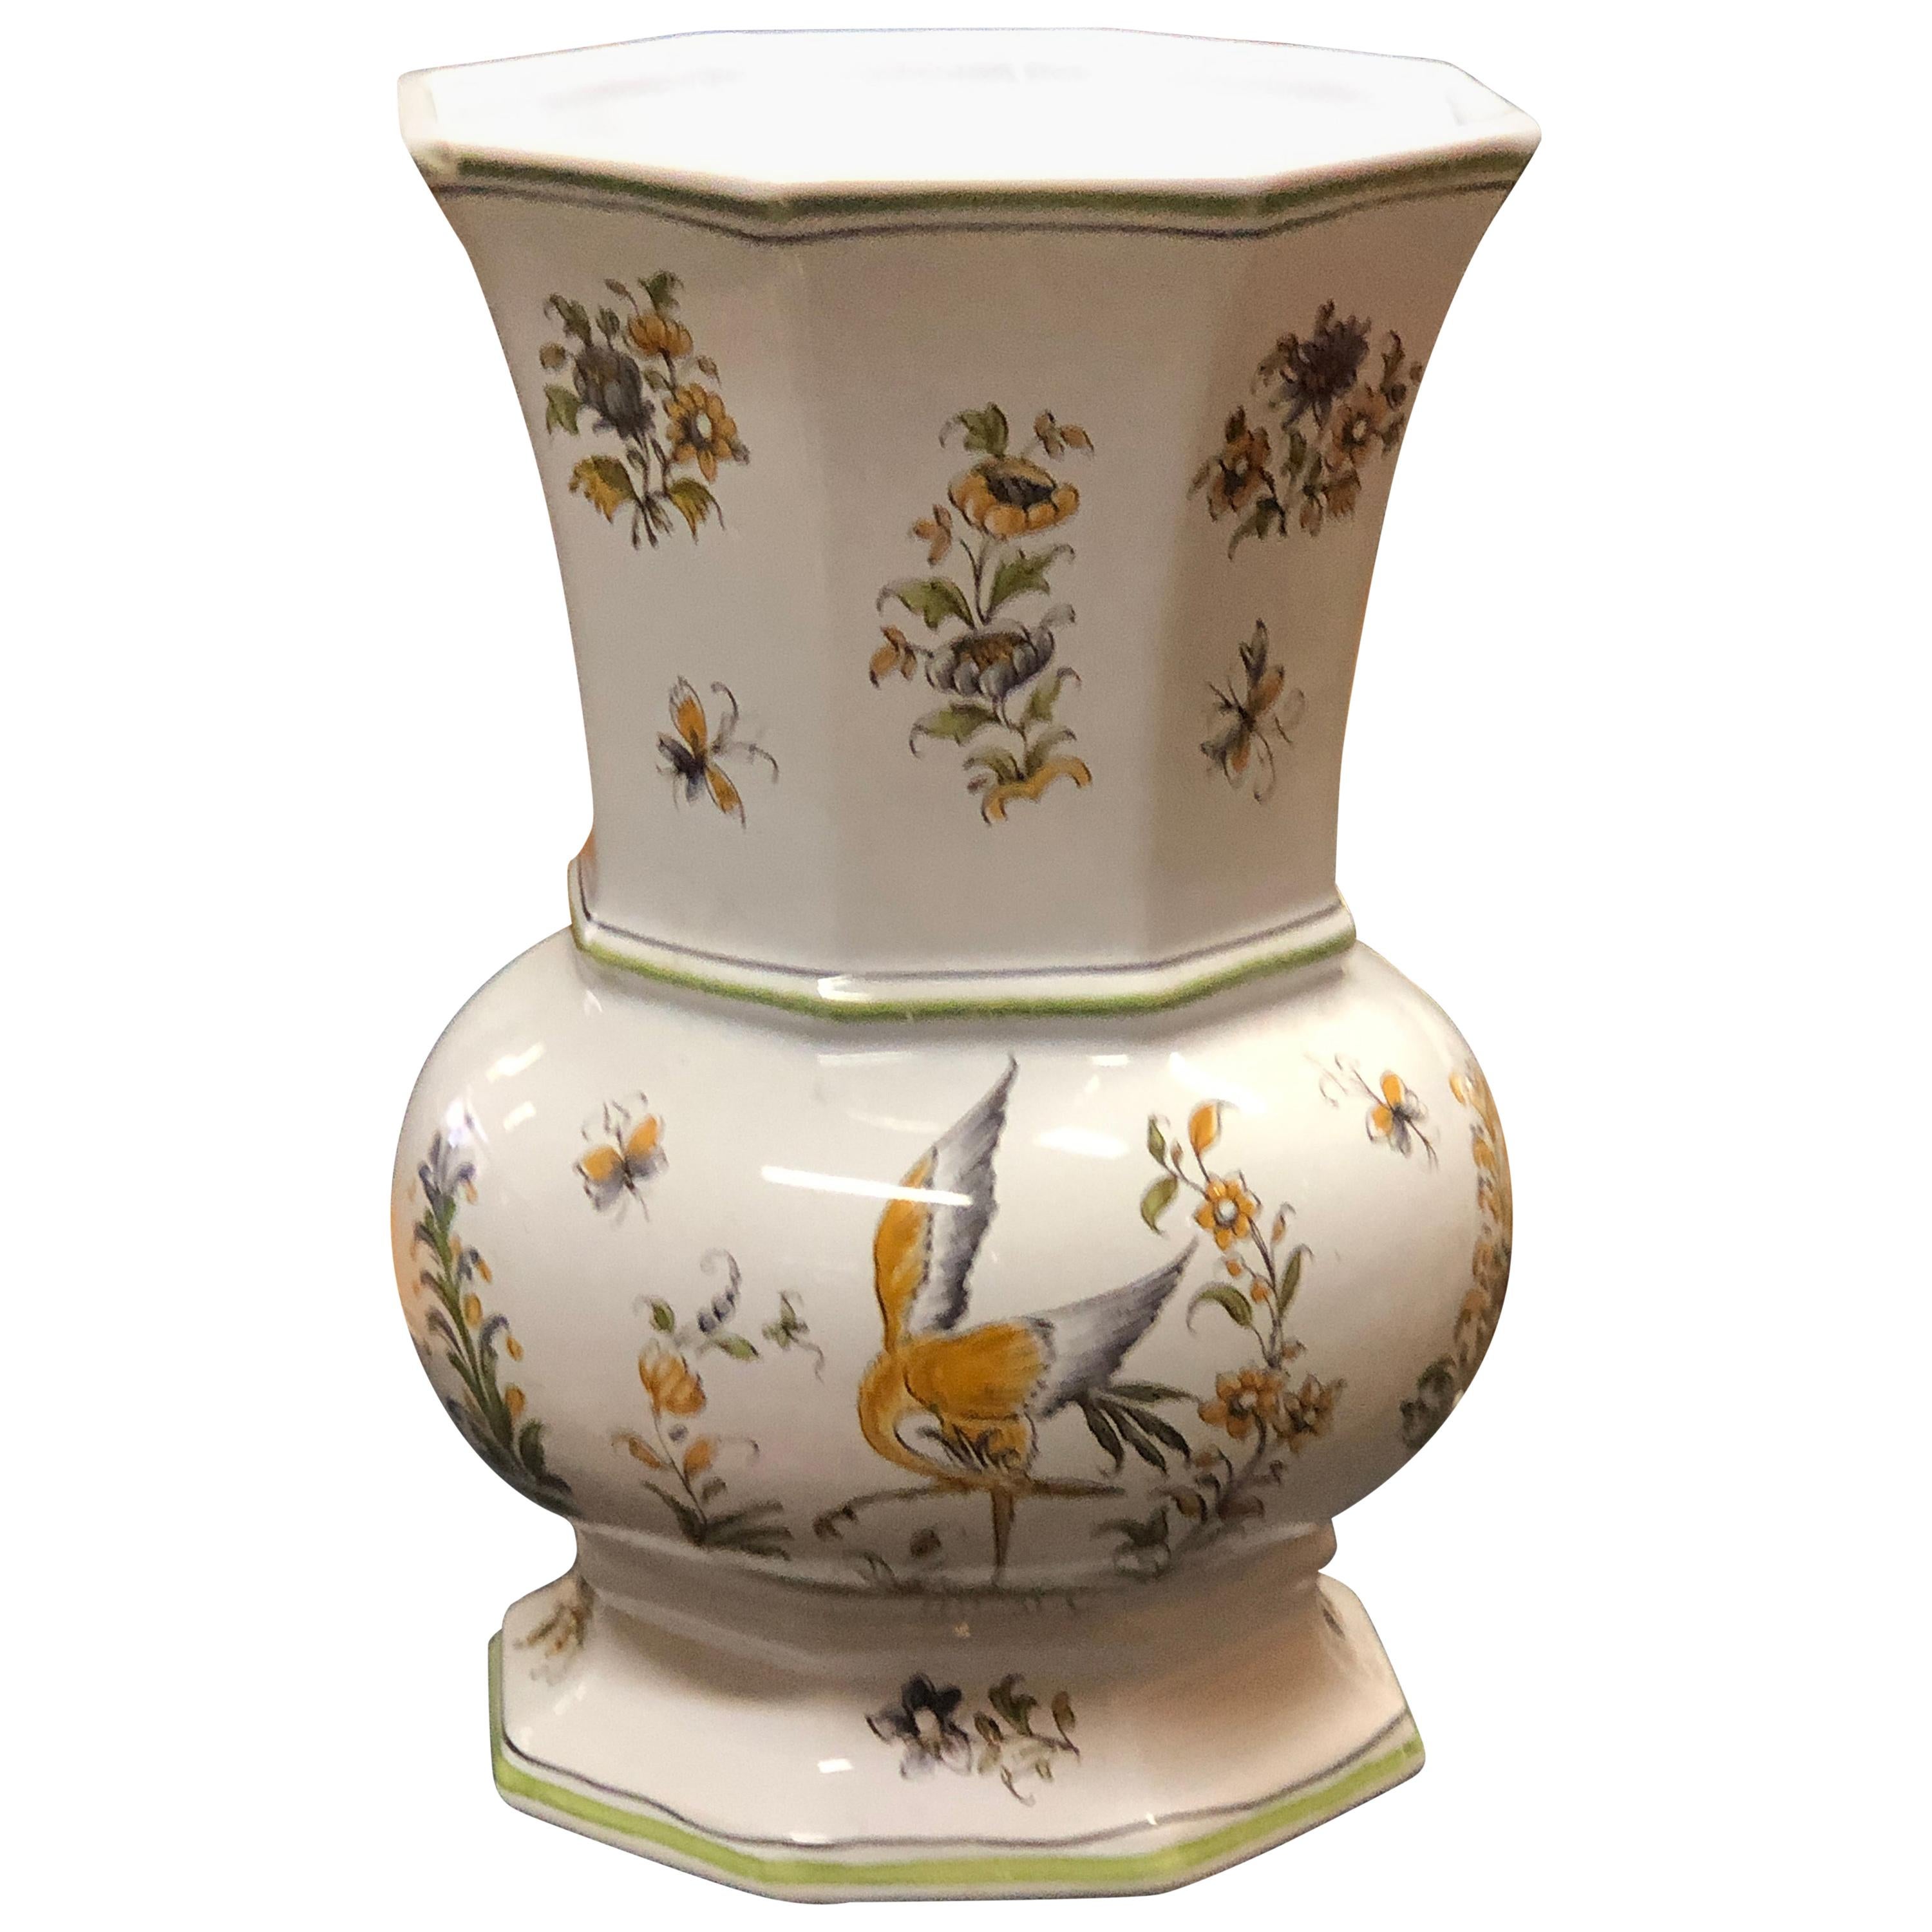 20th Century French Hand Painted Ceramic Vase by Franc Hirigoyen from Moustiers